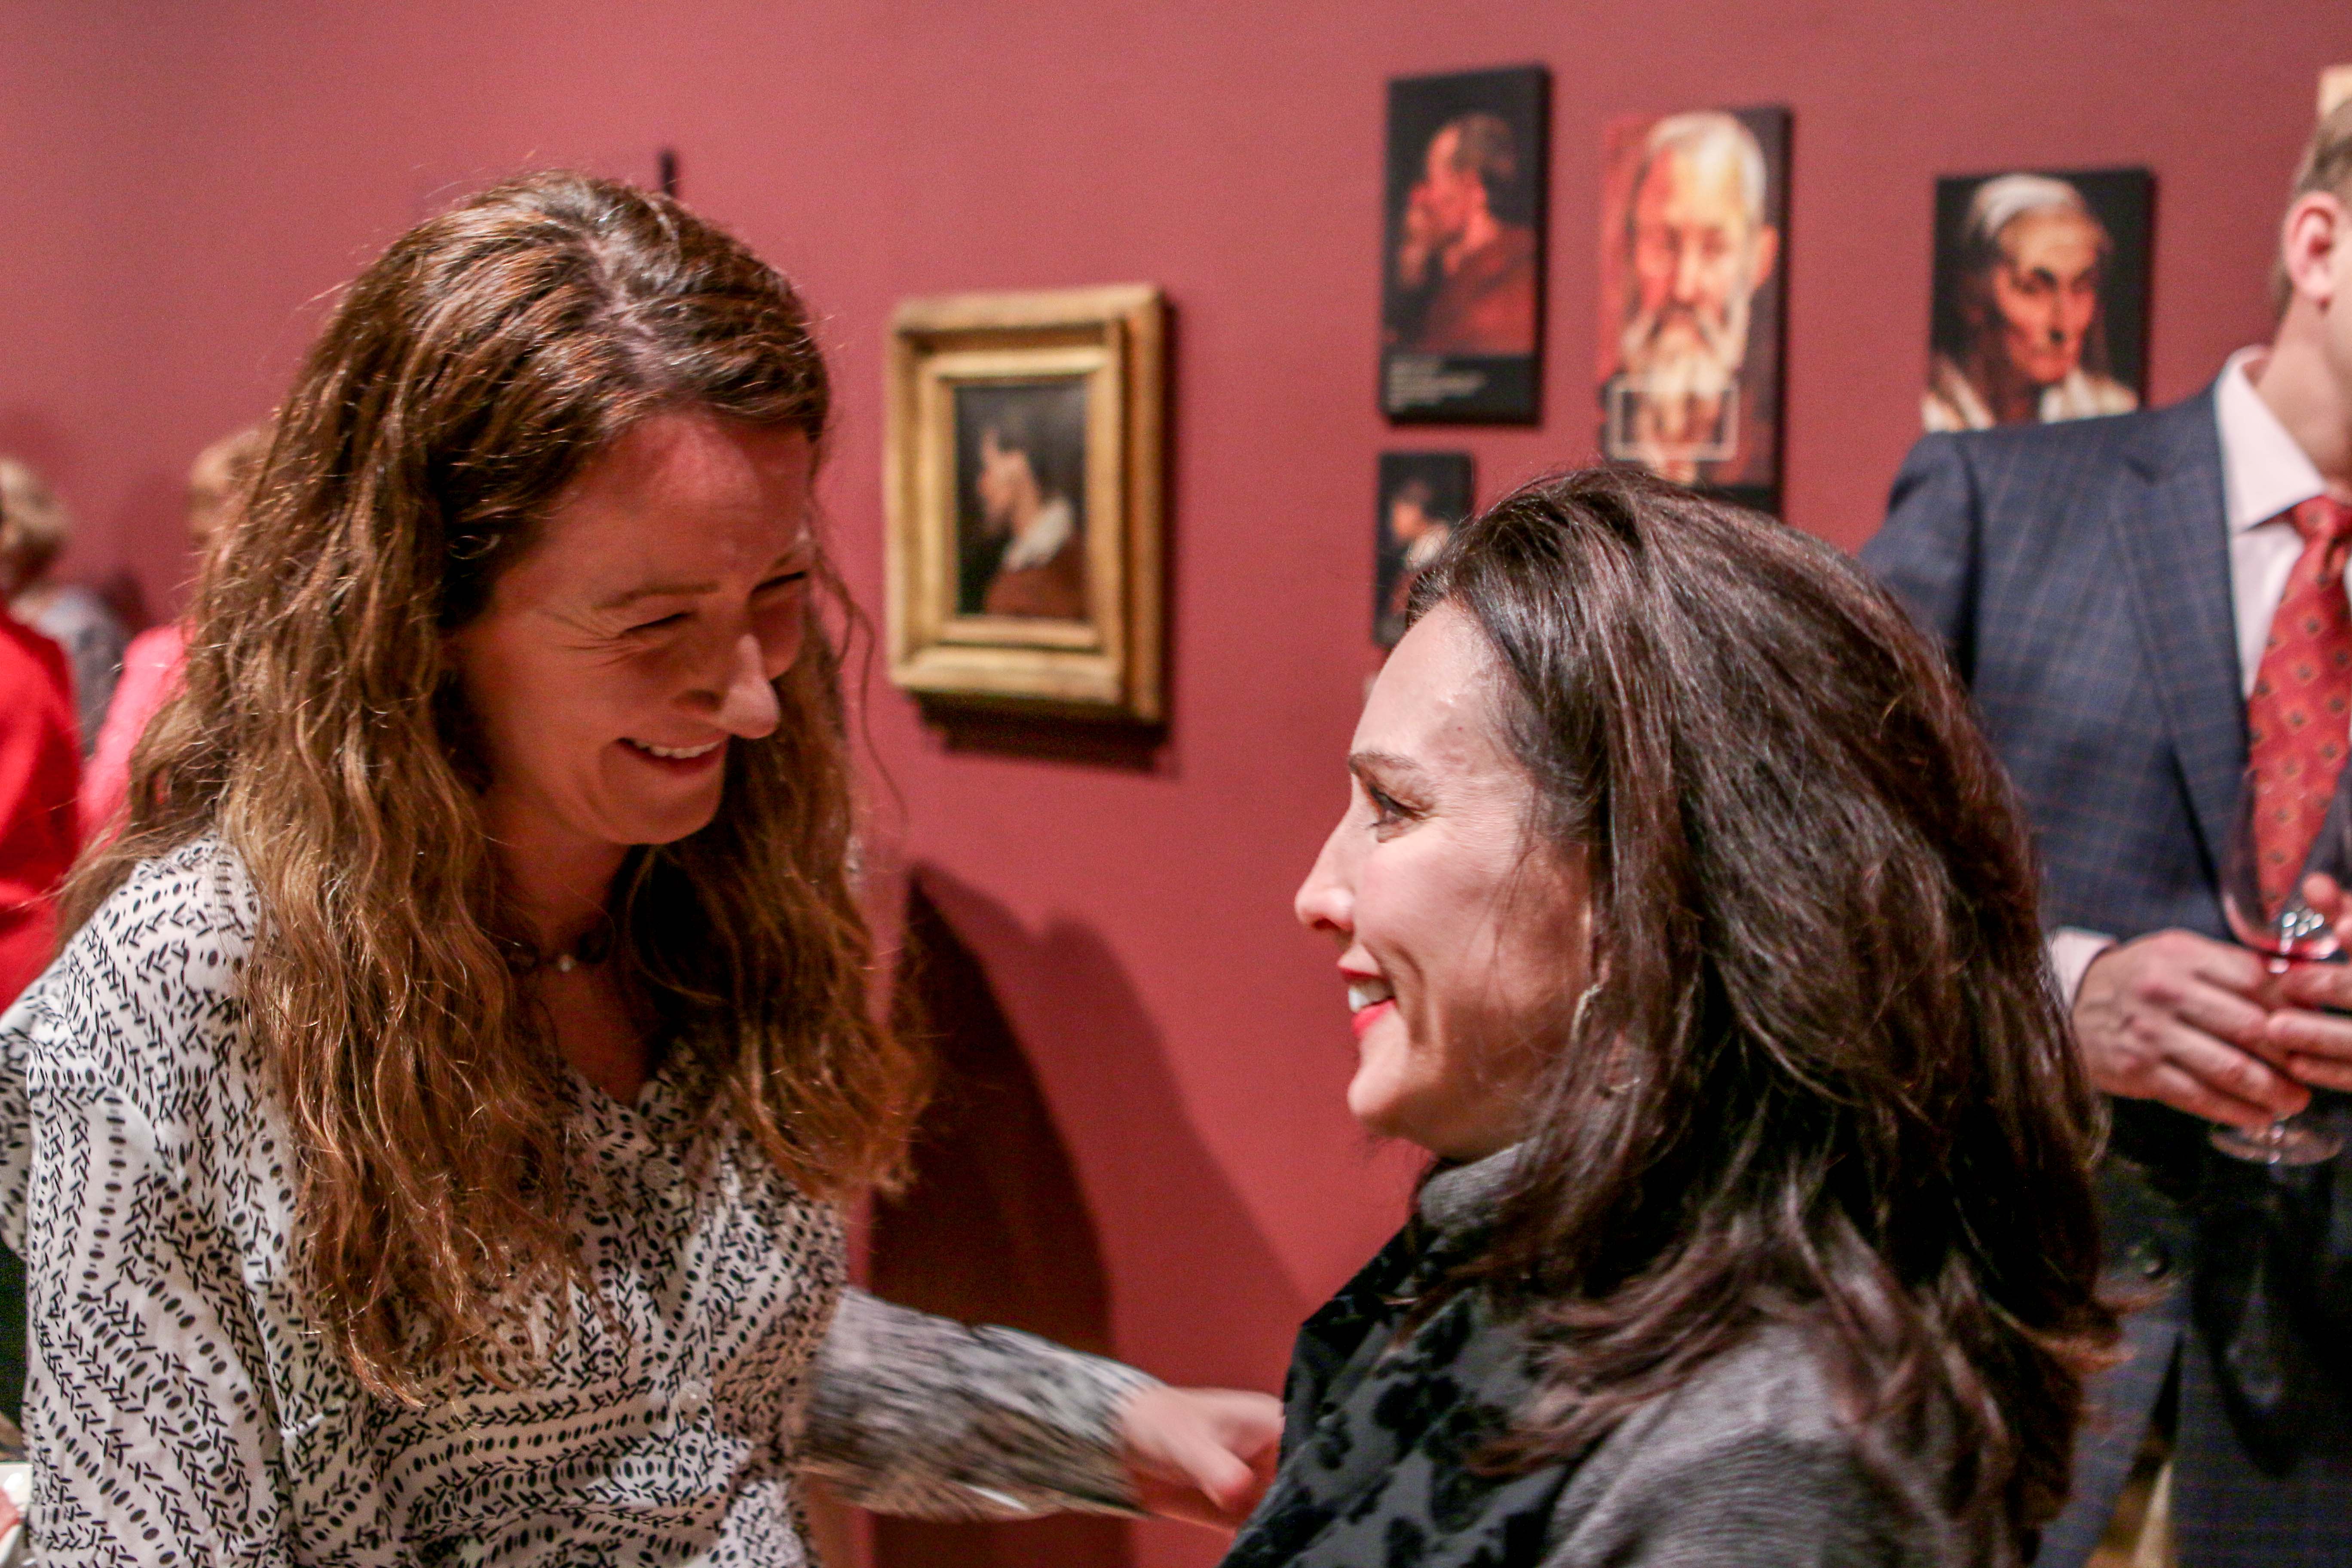 Images from the Membership Opening of the Botticelli exhibit at the Muscarelle Museum of Art, Friday evening, February 10, 2017. (Skip Rowland)